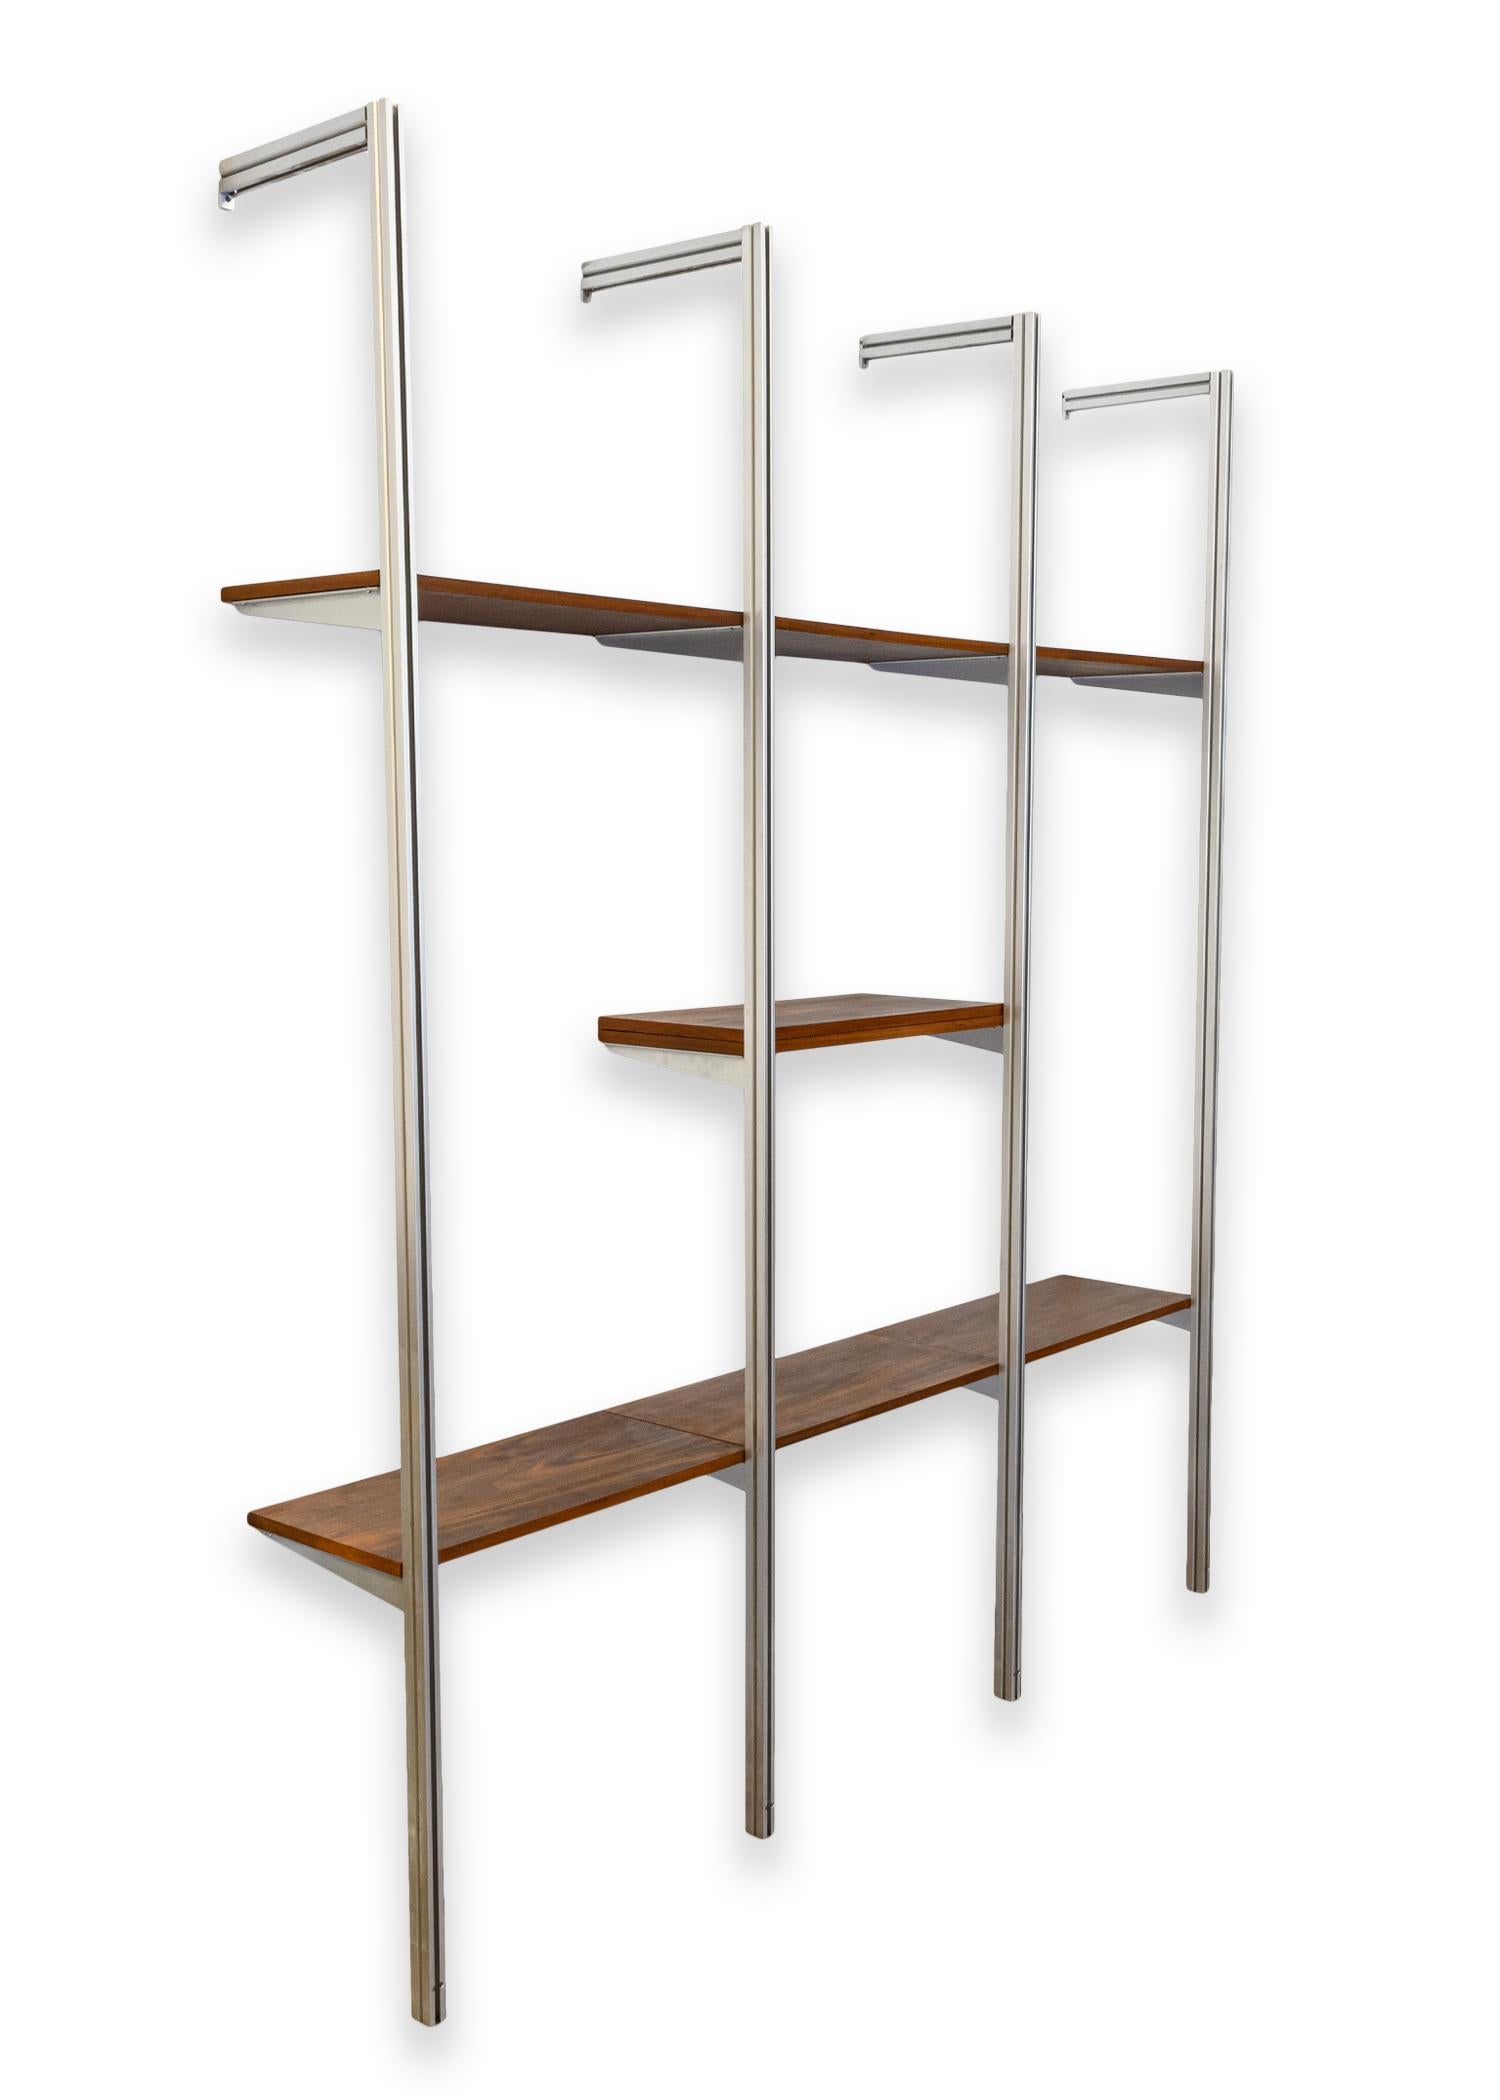 An Omni system wall unit by George Nelson for Herman Miller. A gorgeous mid century modern wall unit featuring sleek, brushed aluminum framing, and walnut shelving. This piece has been recently refinished. This piece has 3 bays, and 7 shelves with